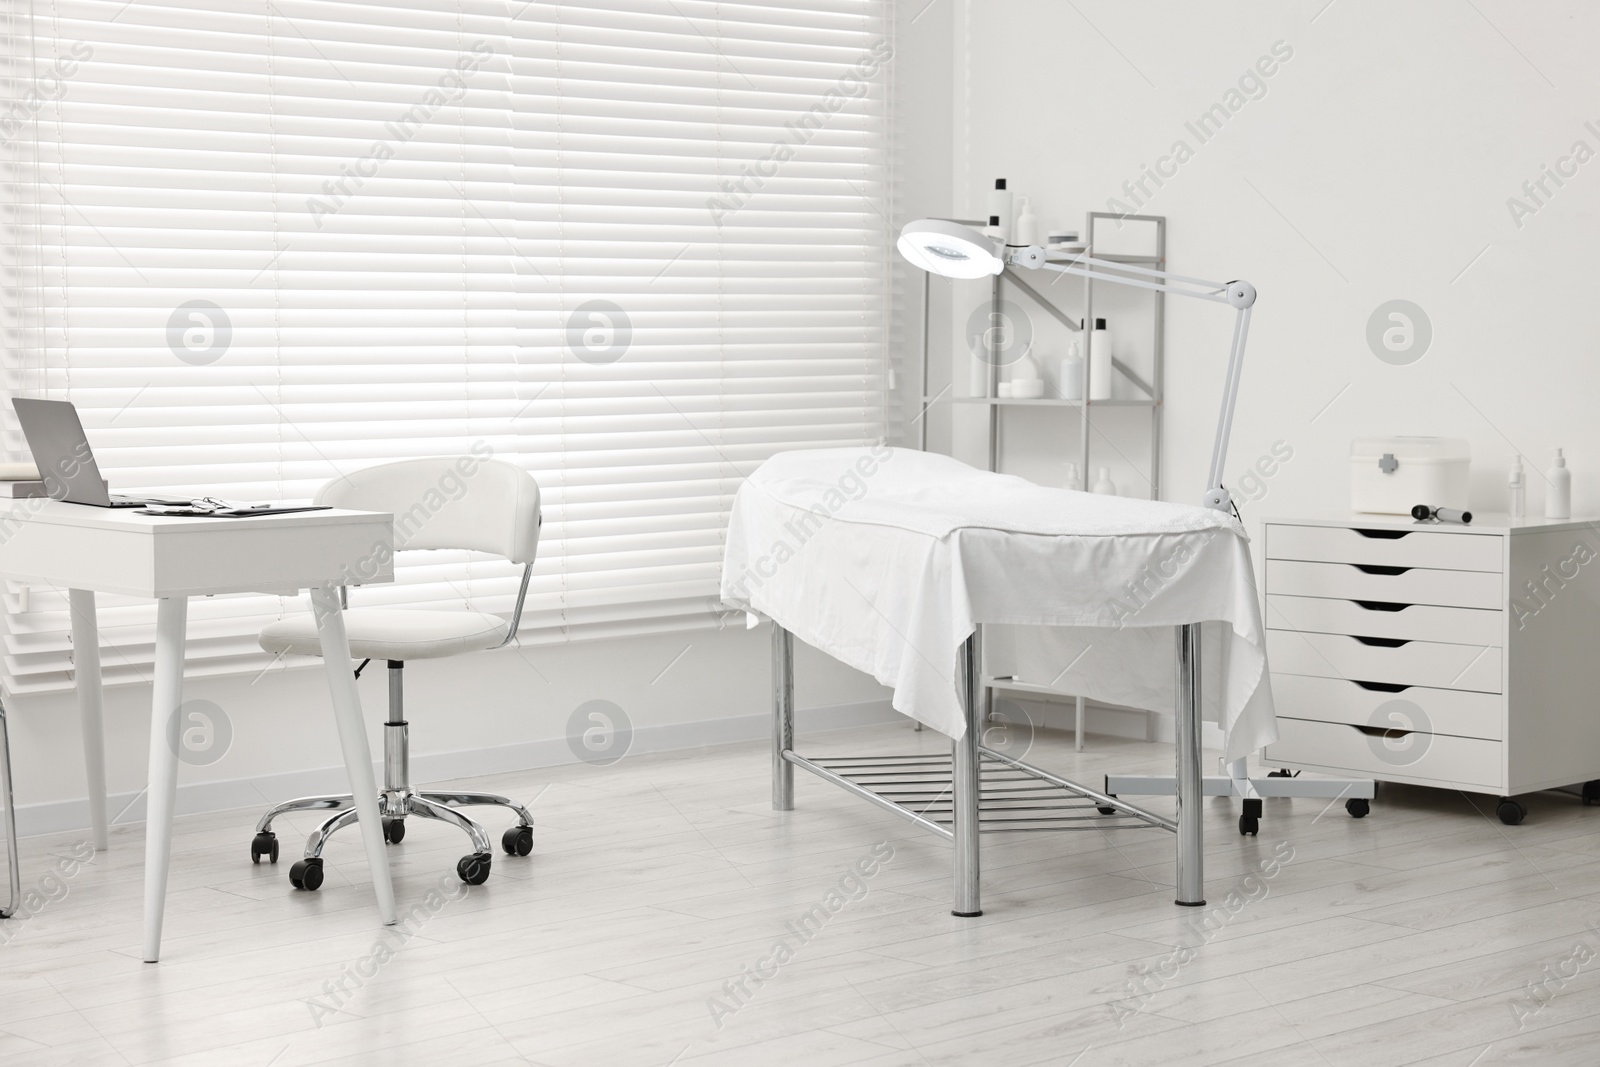 Photo of Modern interior of dermatologist's office with examination table